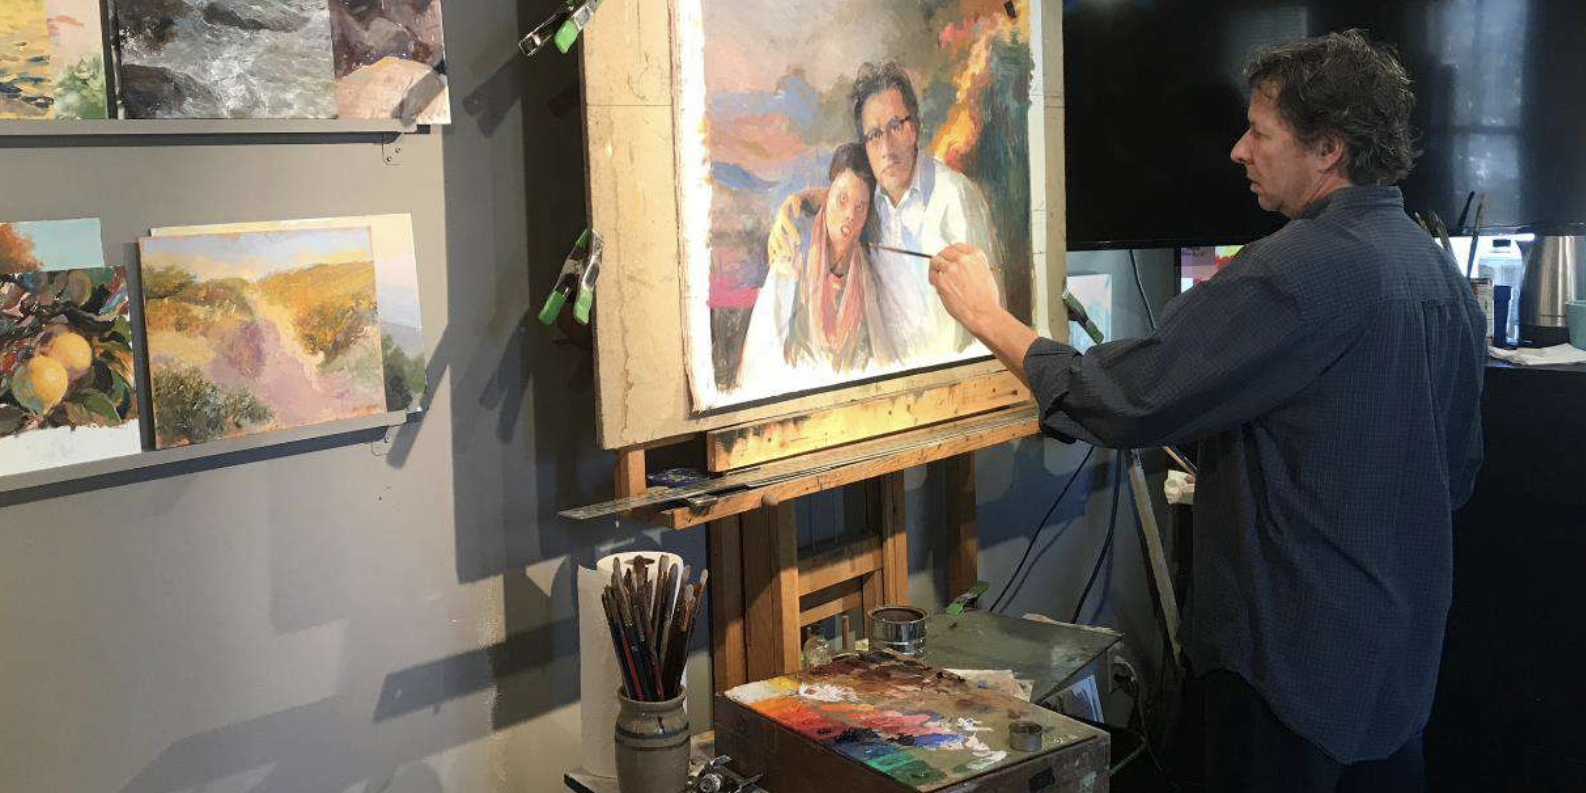 Artist Timothy Chambers stands at his easel painting a portrait of a man with his patient, a young woman who is a burn victim. In the foreground are a palette of oil paints and oil painting brushes.